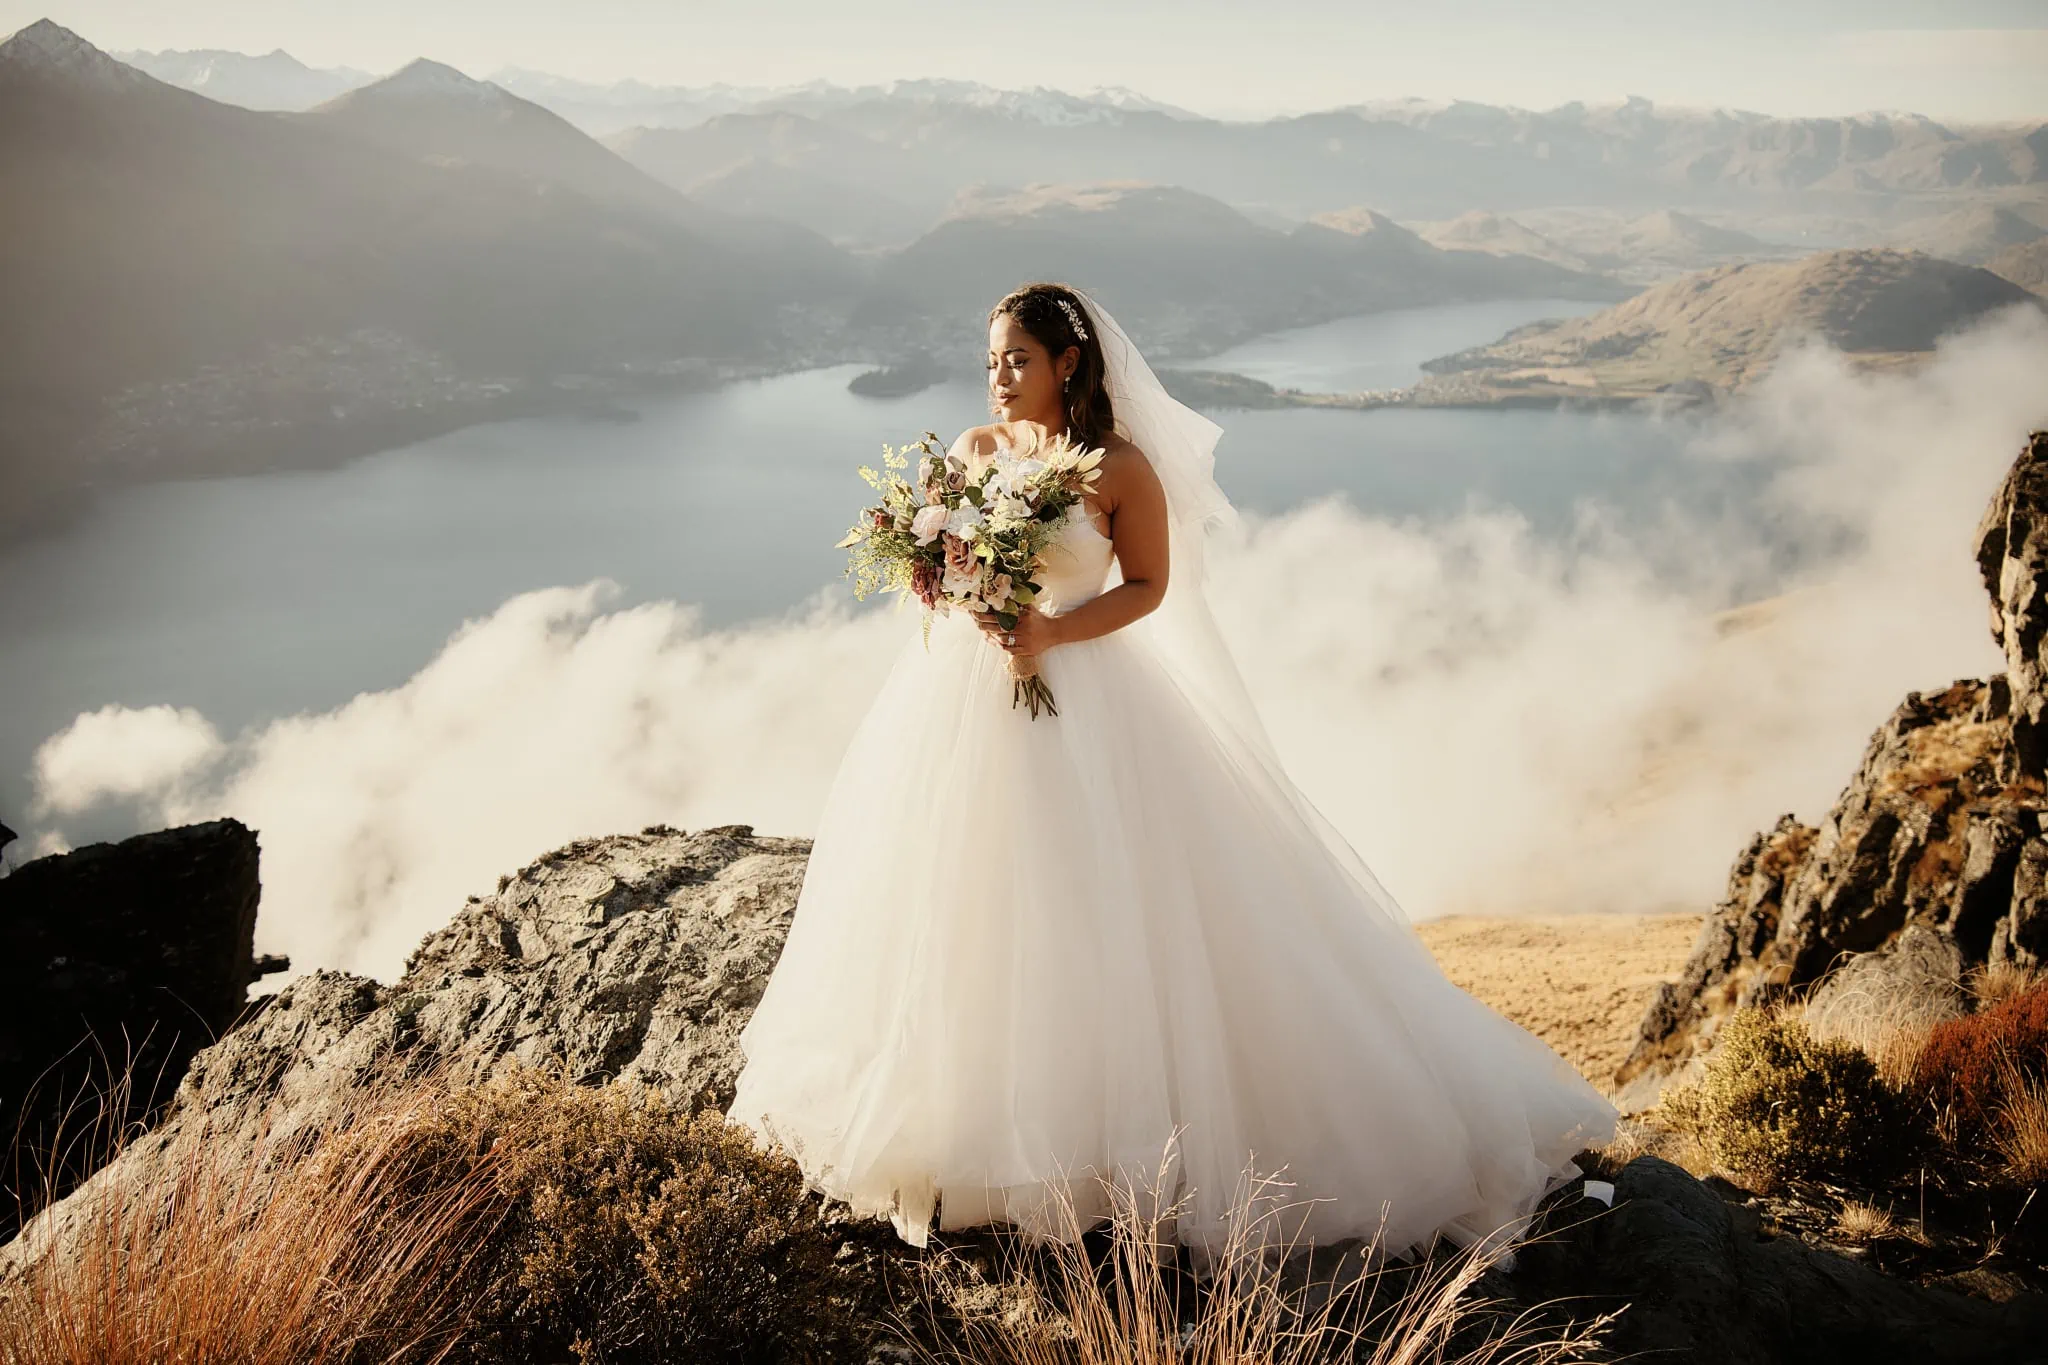 Queenstown New Zealand Elopement Wedding Photographer - Amy and Callum have a Queenstown Heli Pre Wedding Shoot on top of a mountain overlooking Lake Wanaka.